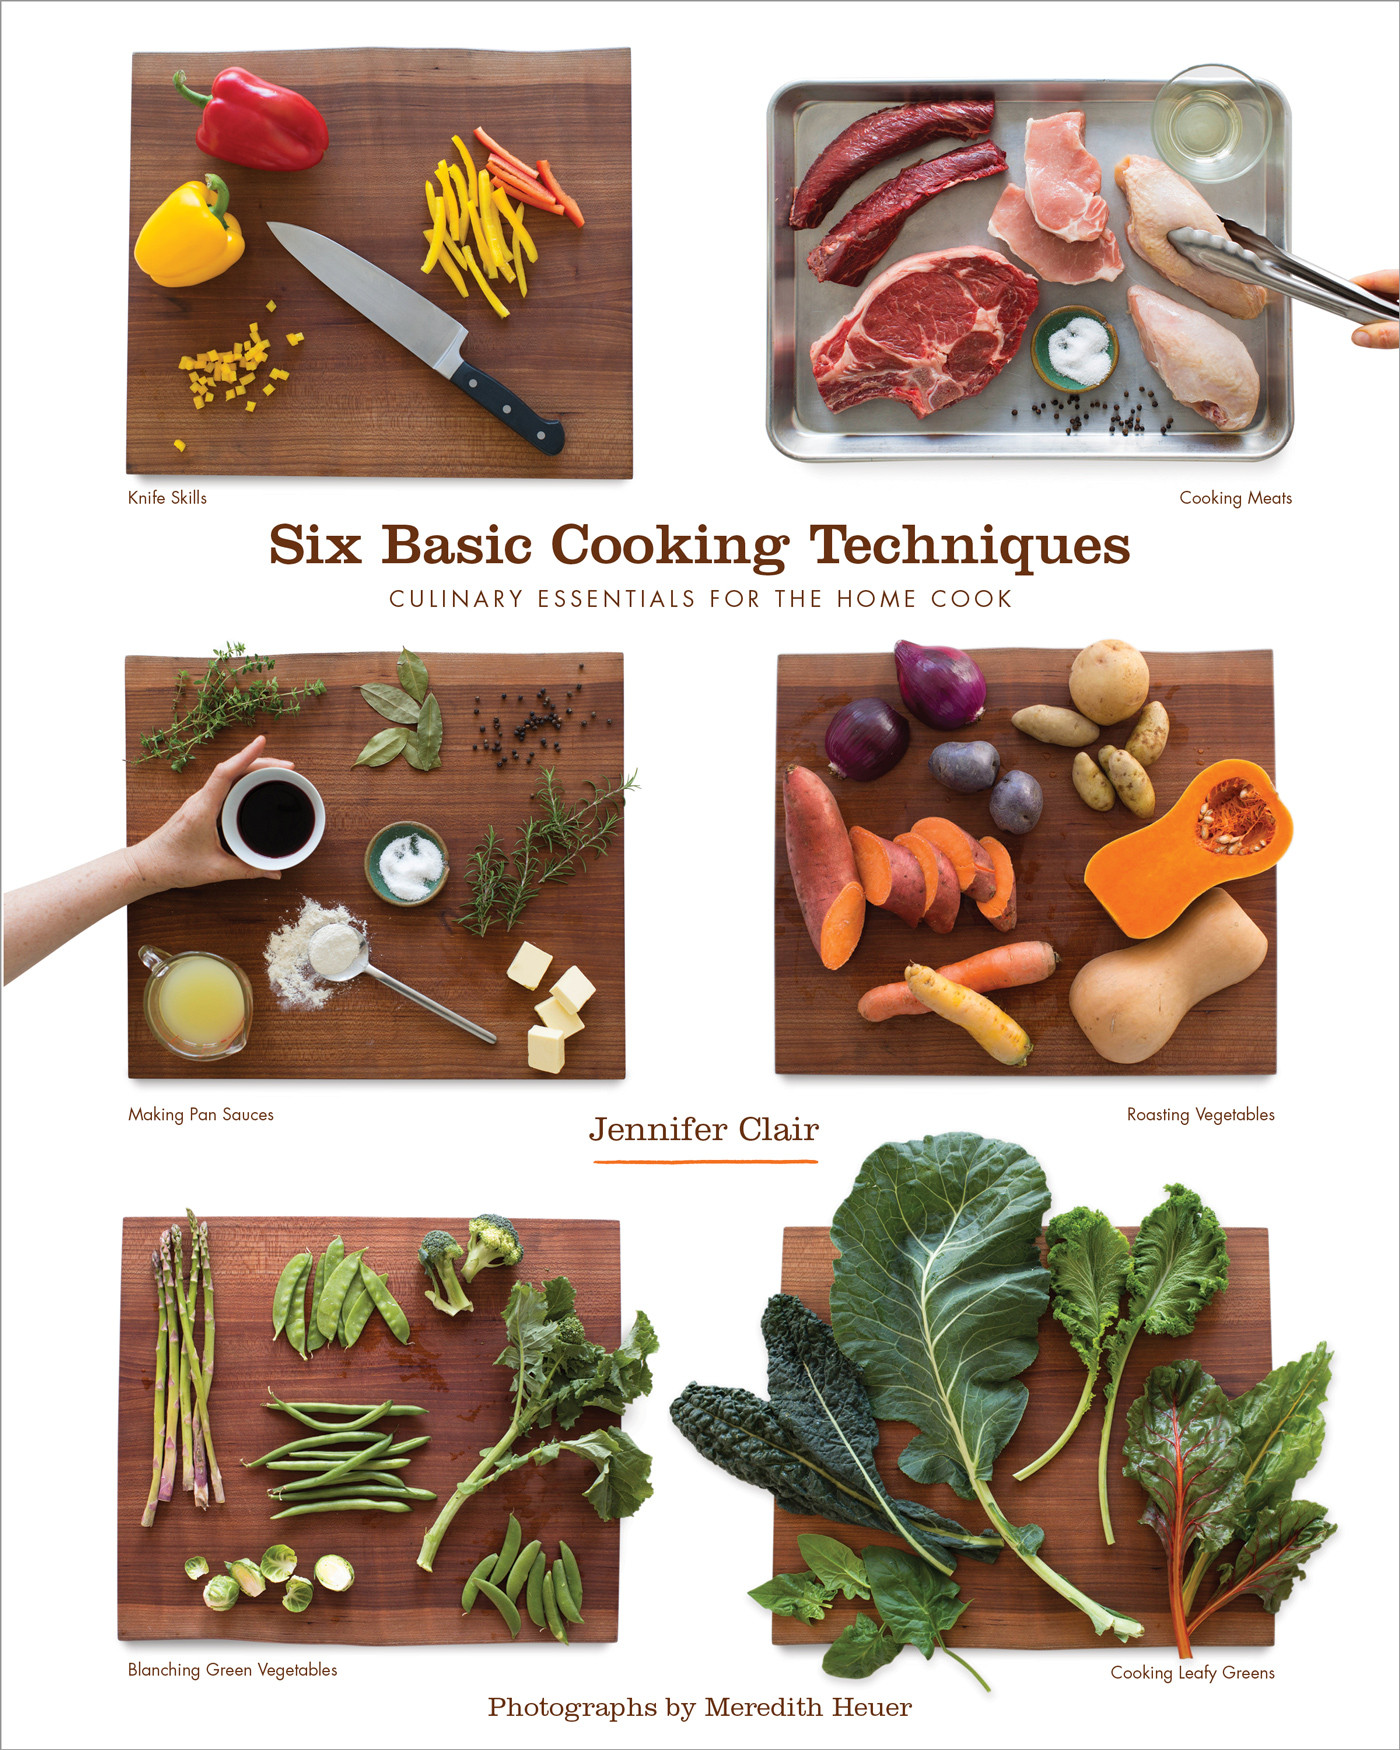 Cooking Tips For Beginners
